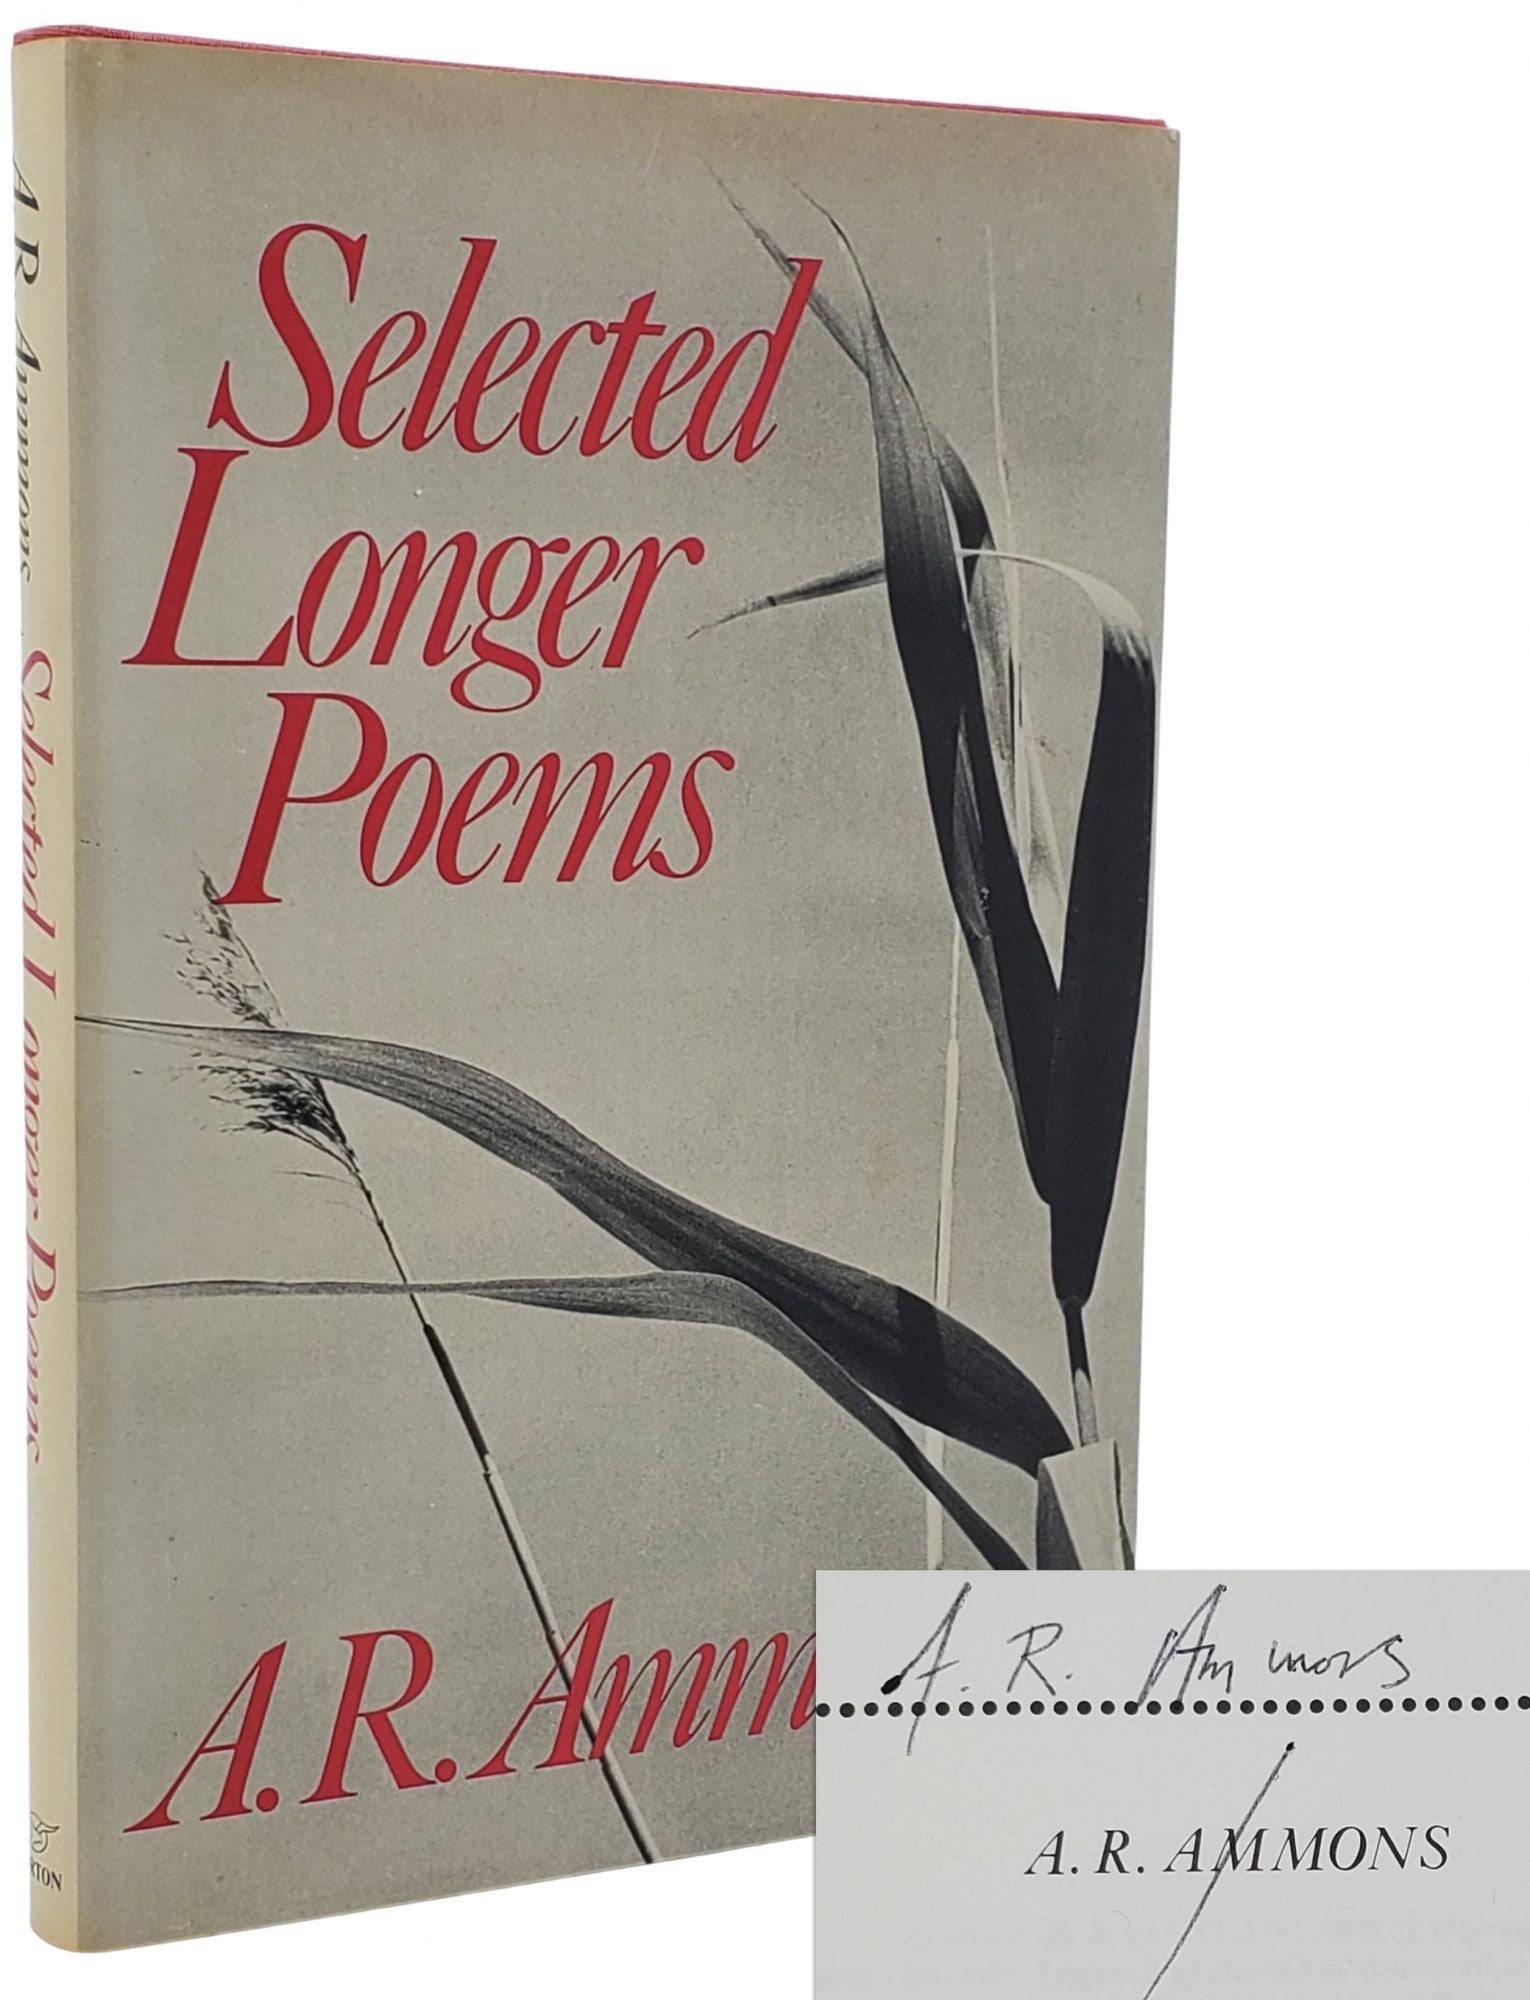 [Book #50319] SELECTED LONGER POEMS. A. R. Ammons.